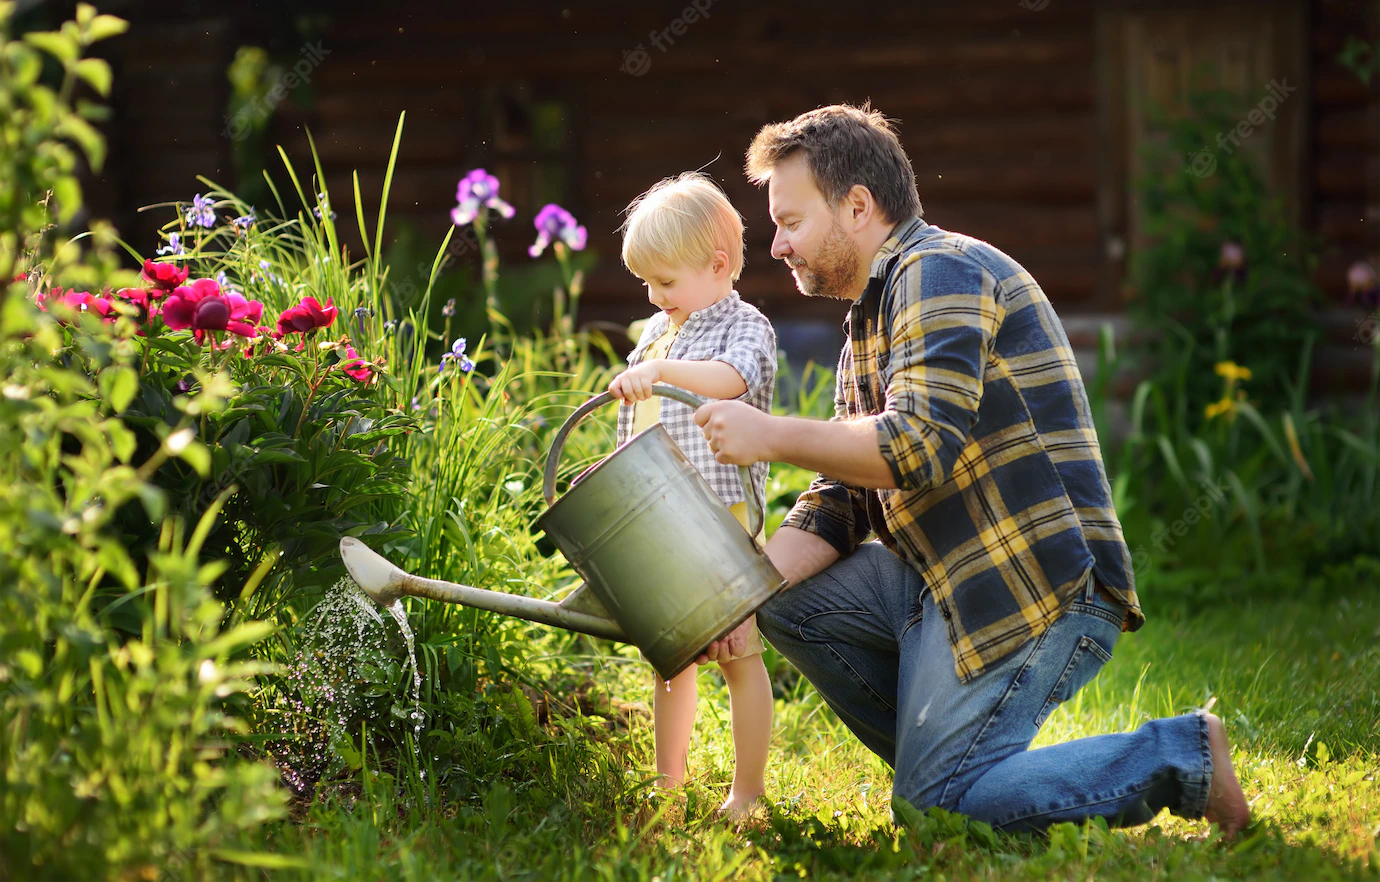 A man is kneeling on a garden kneeler – he is holding a watering can and is watering some flowers. A young boy is standing next to the man and is helping to water the flower bed